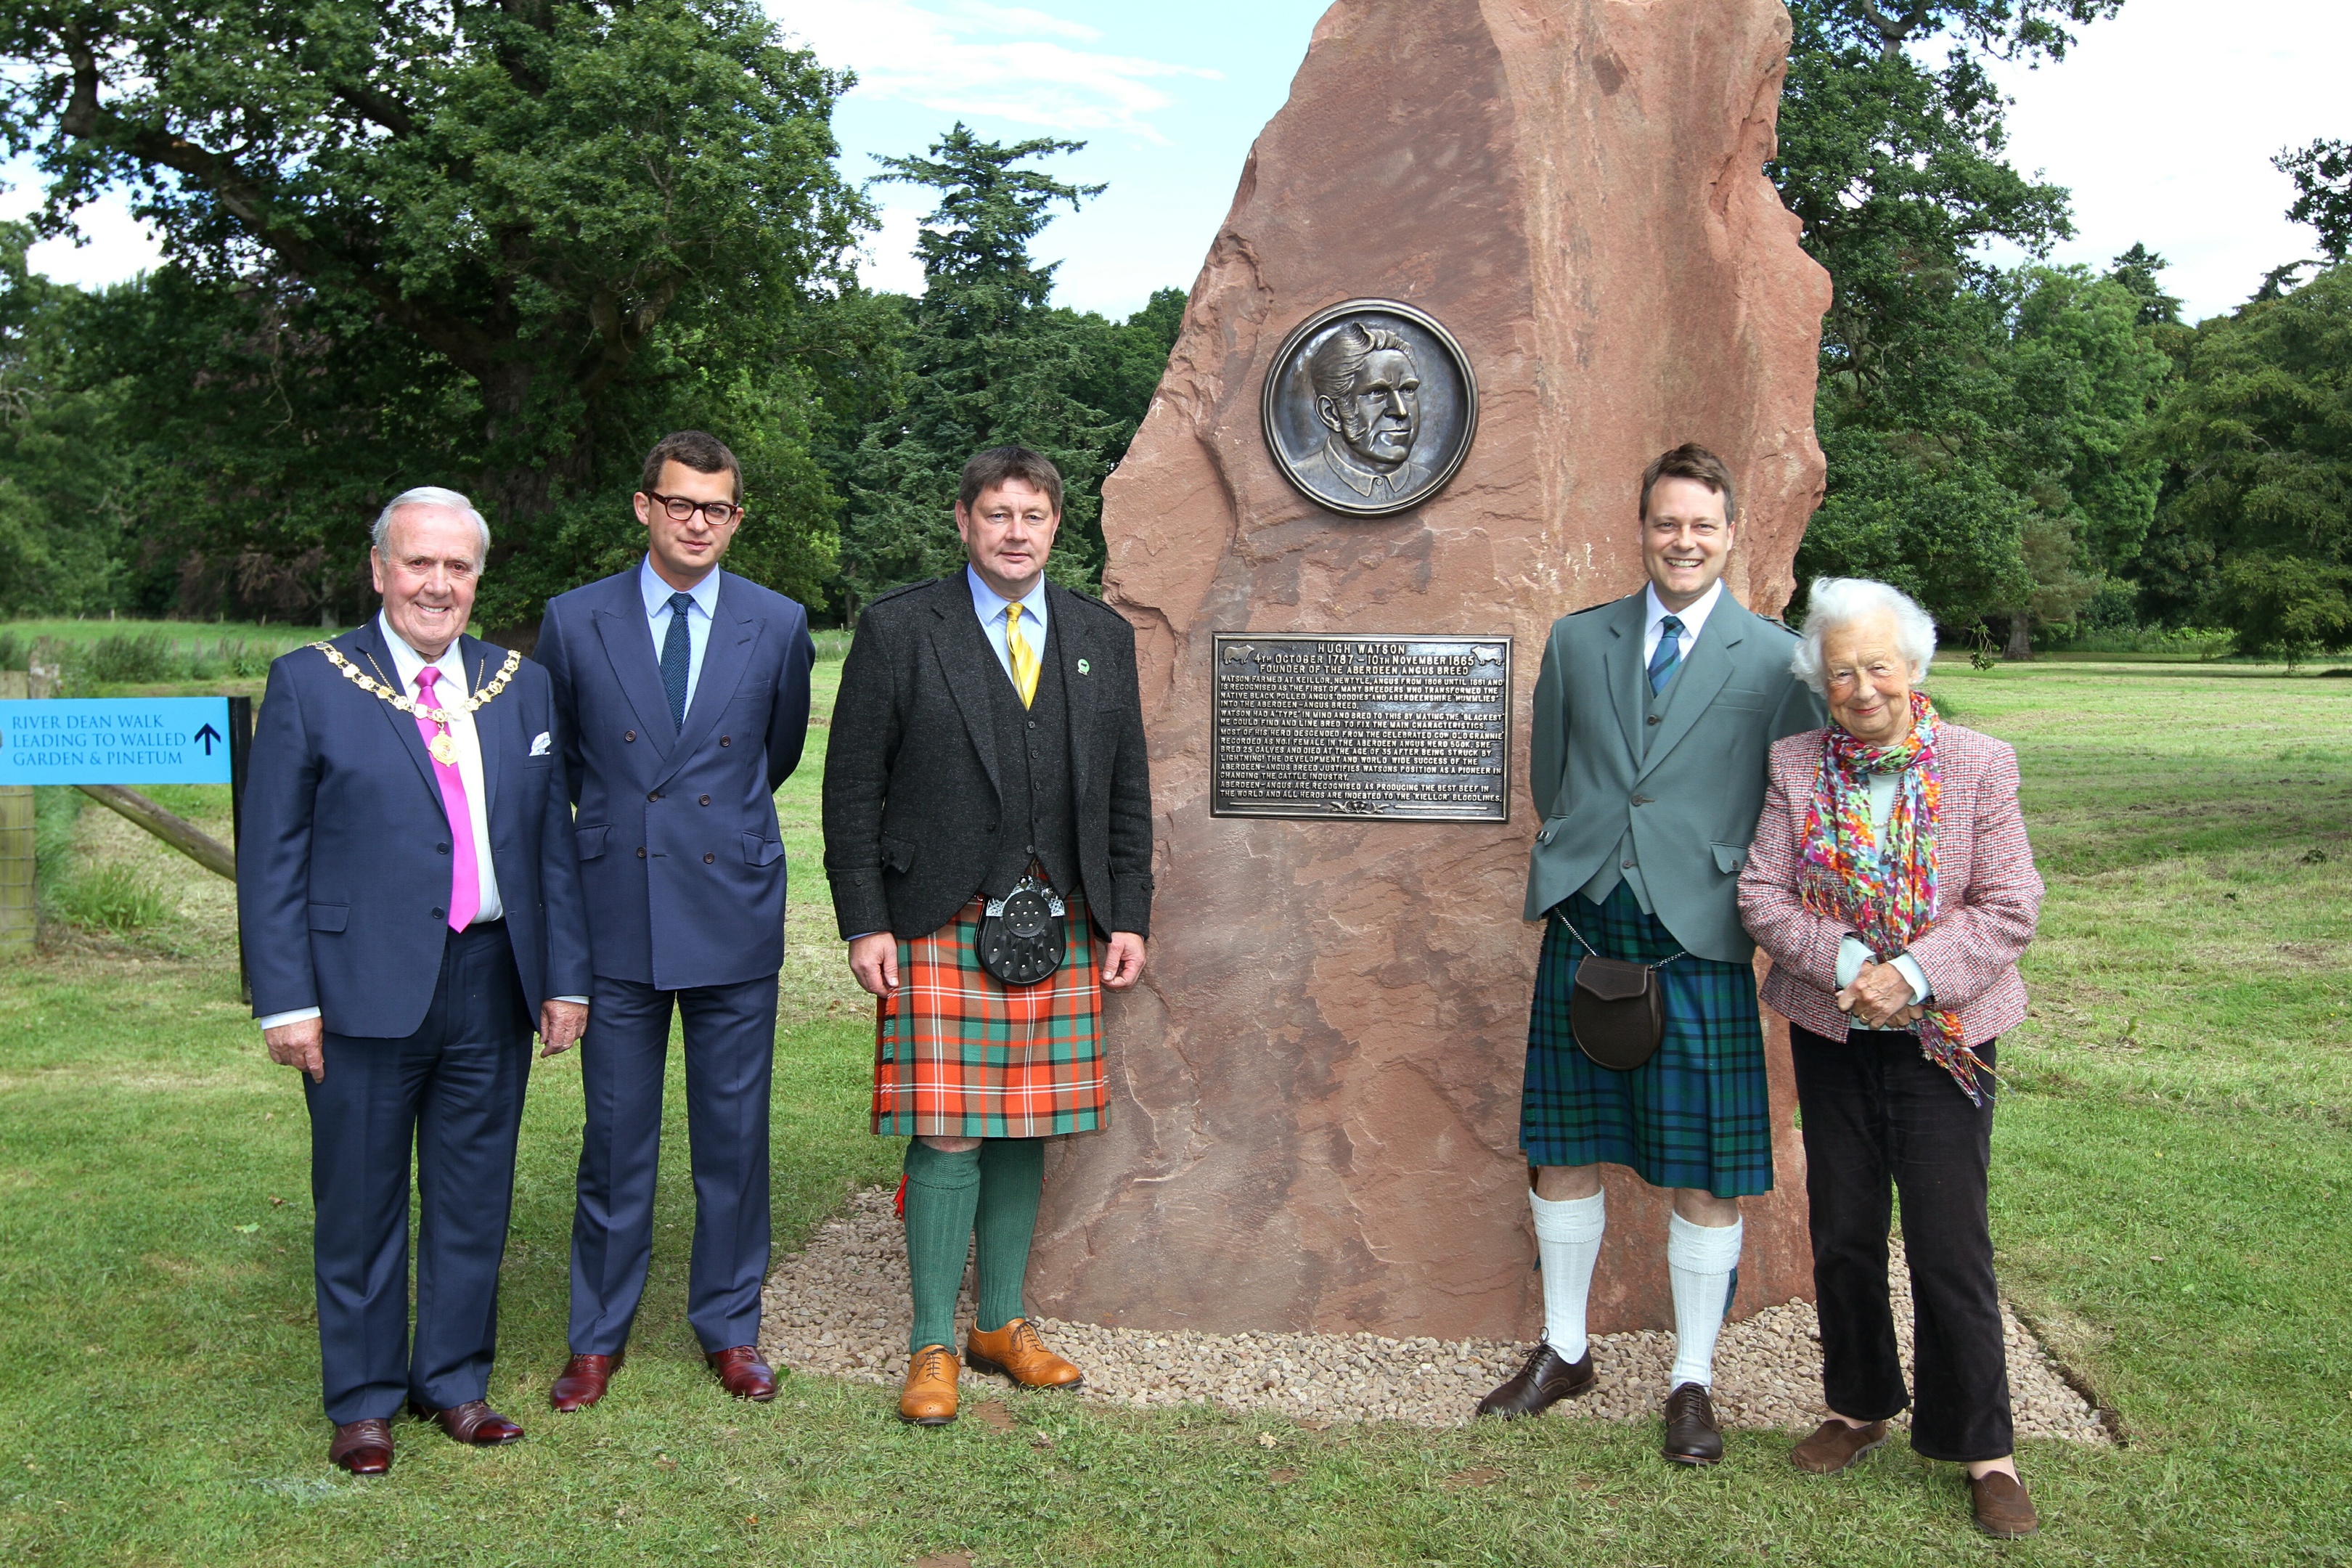 From left - Angus depute Provost Colin Brown, Lord Strathmore, Alex Sanger, Roddy Mathieson, and Mary, Dowager Countess Strathmore